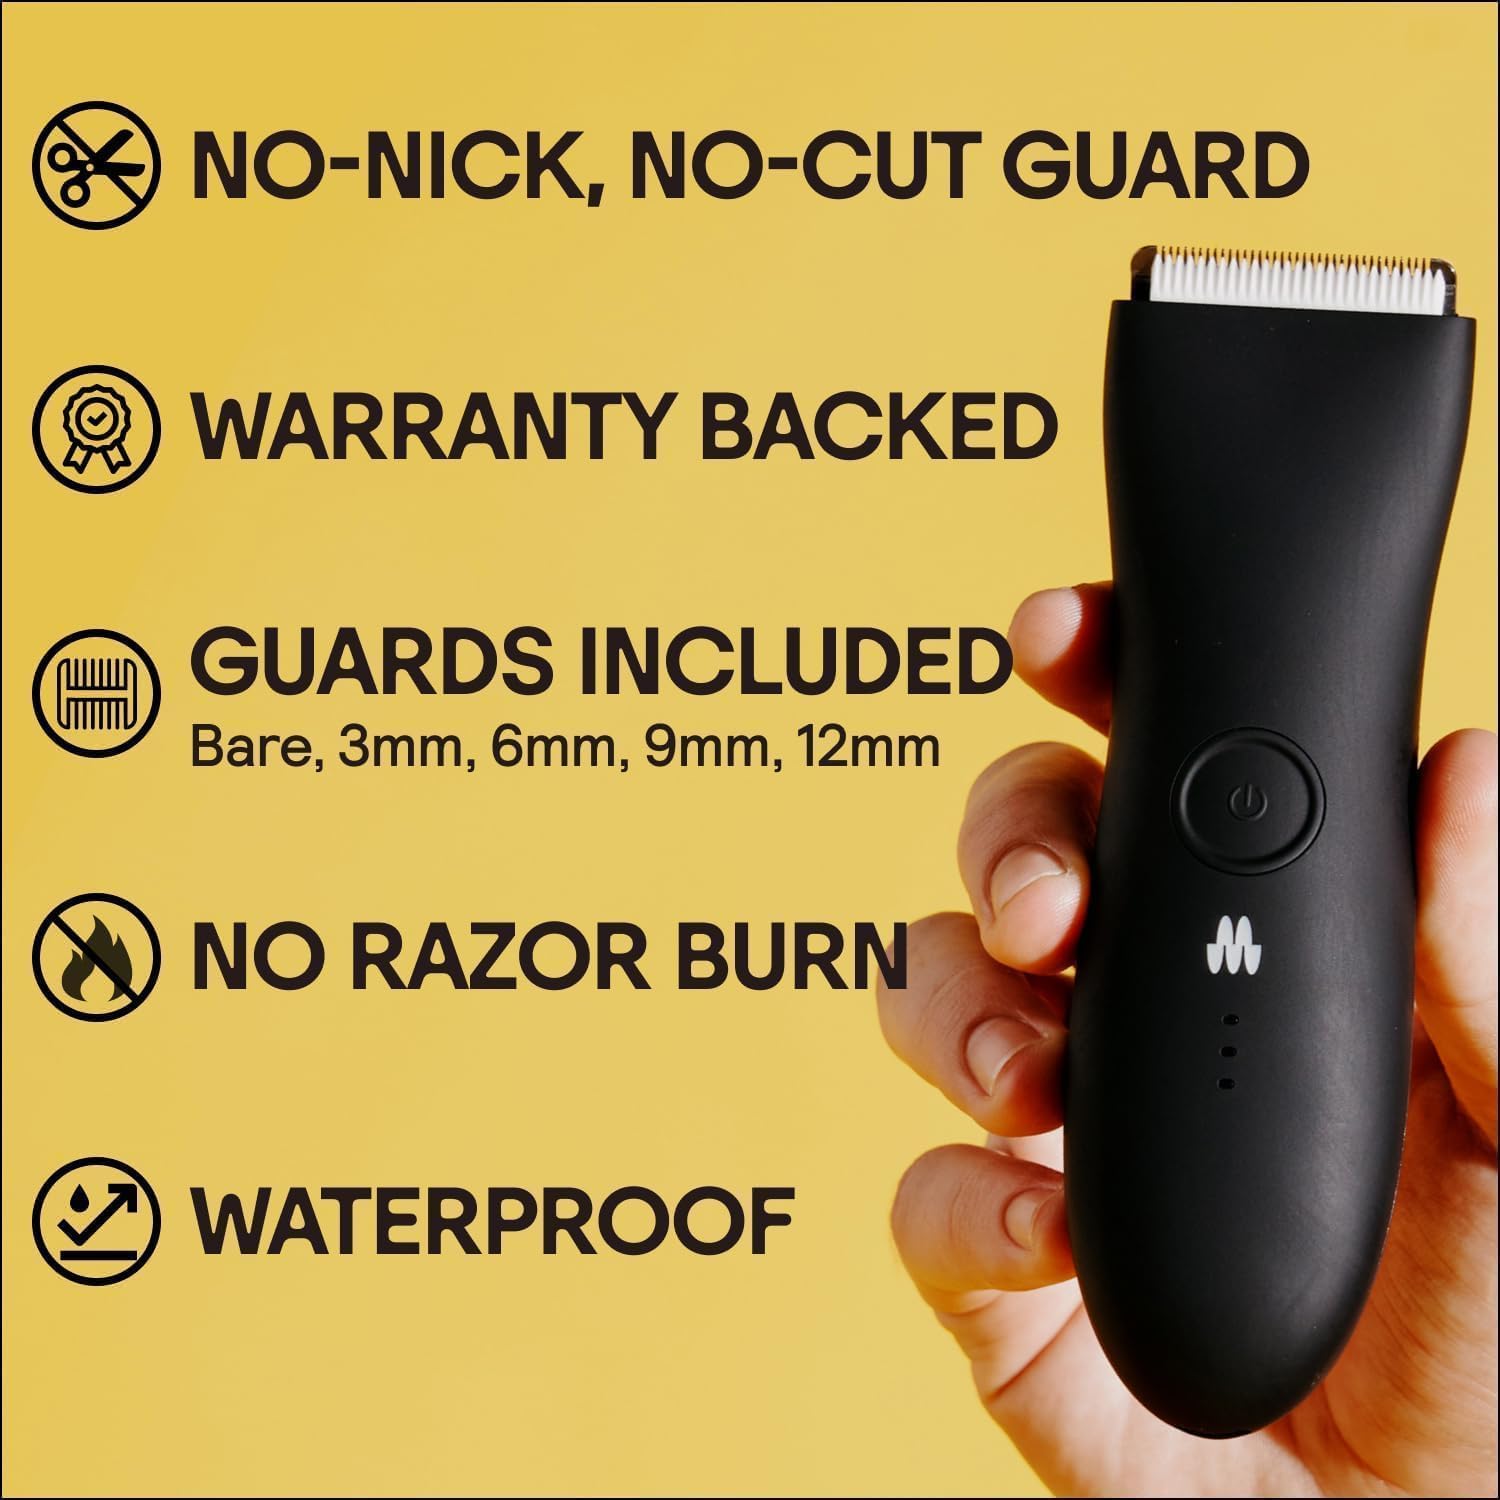 The Complete Package by Meridian: Includes Men’s Waterproof Electric Below-The-Belt Trimmer and The Spray (50 mL) - Features Ceramic Blades and Sensitive Shave Tech (Onyx)